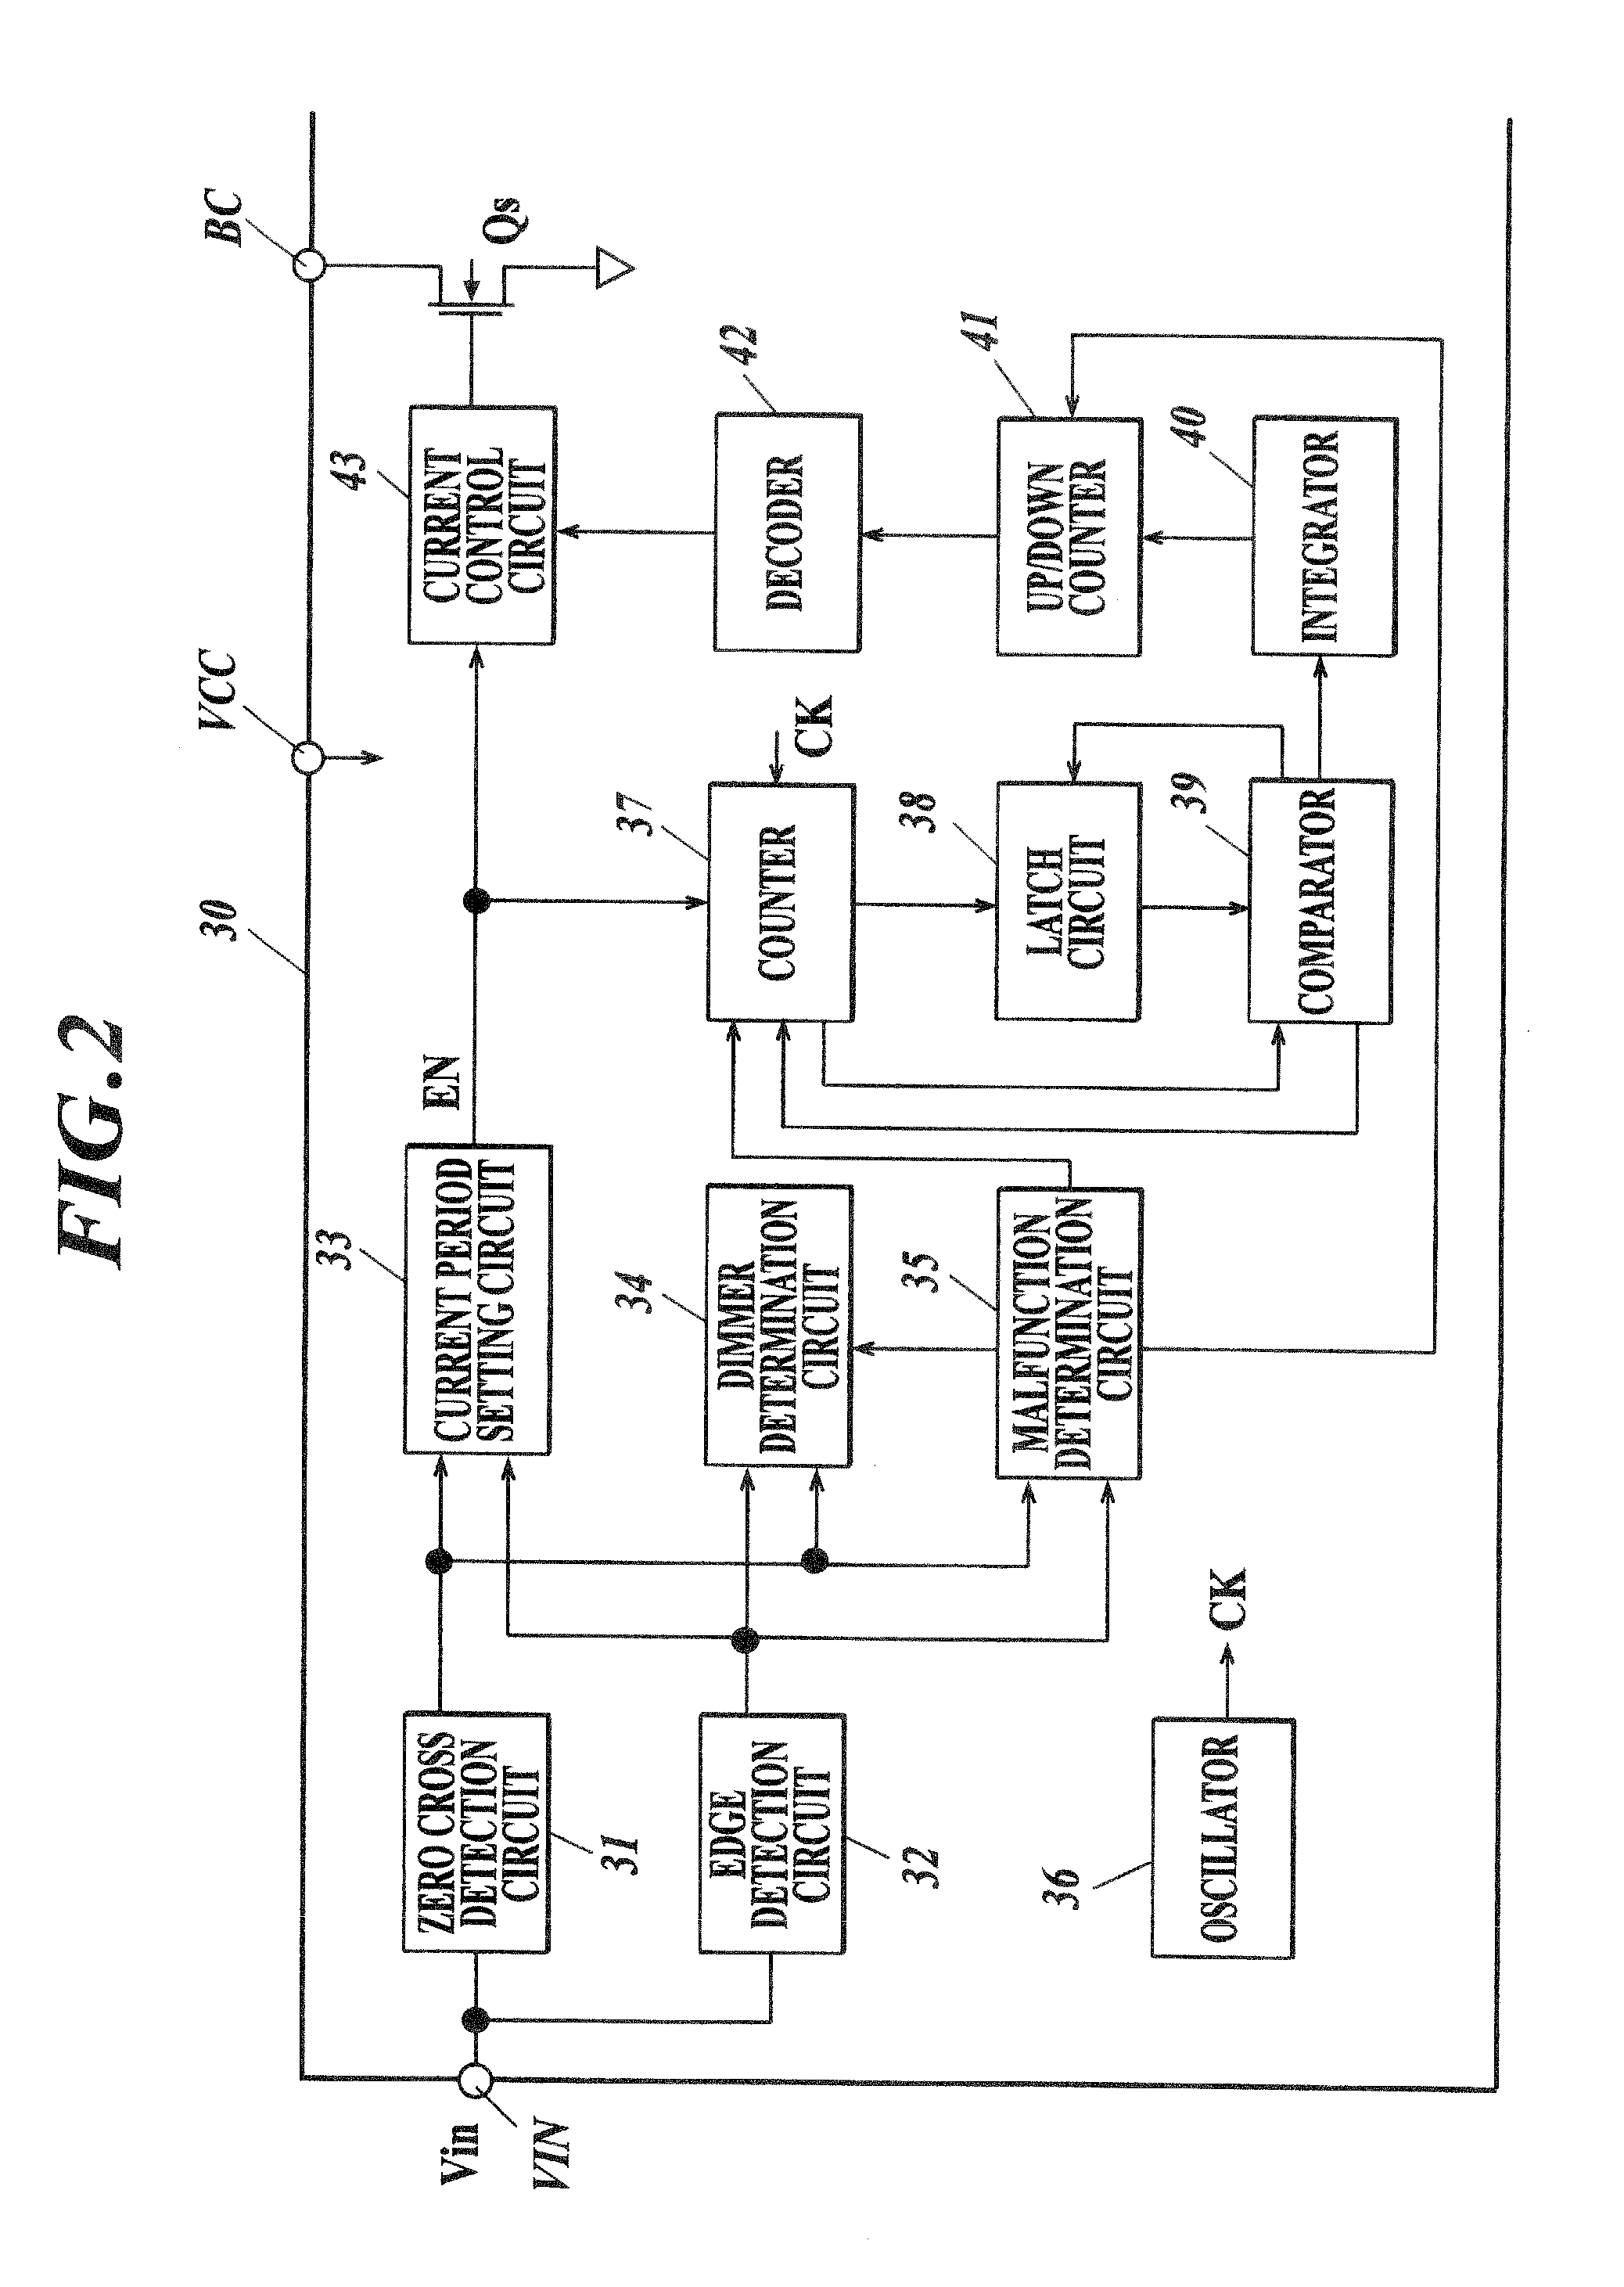 Lighting power supply device and method for controlling holding current